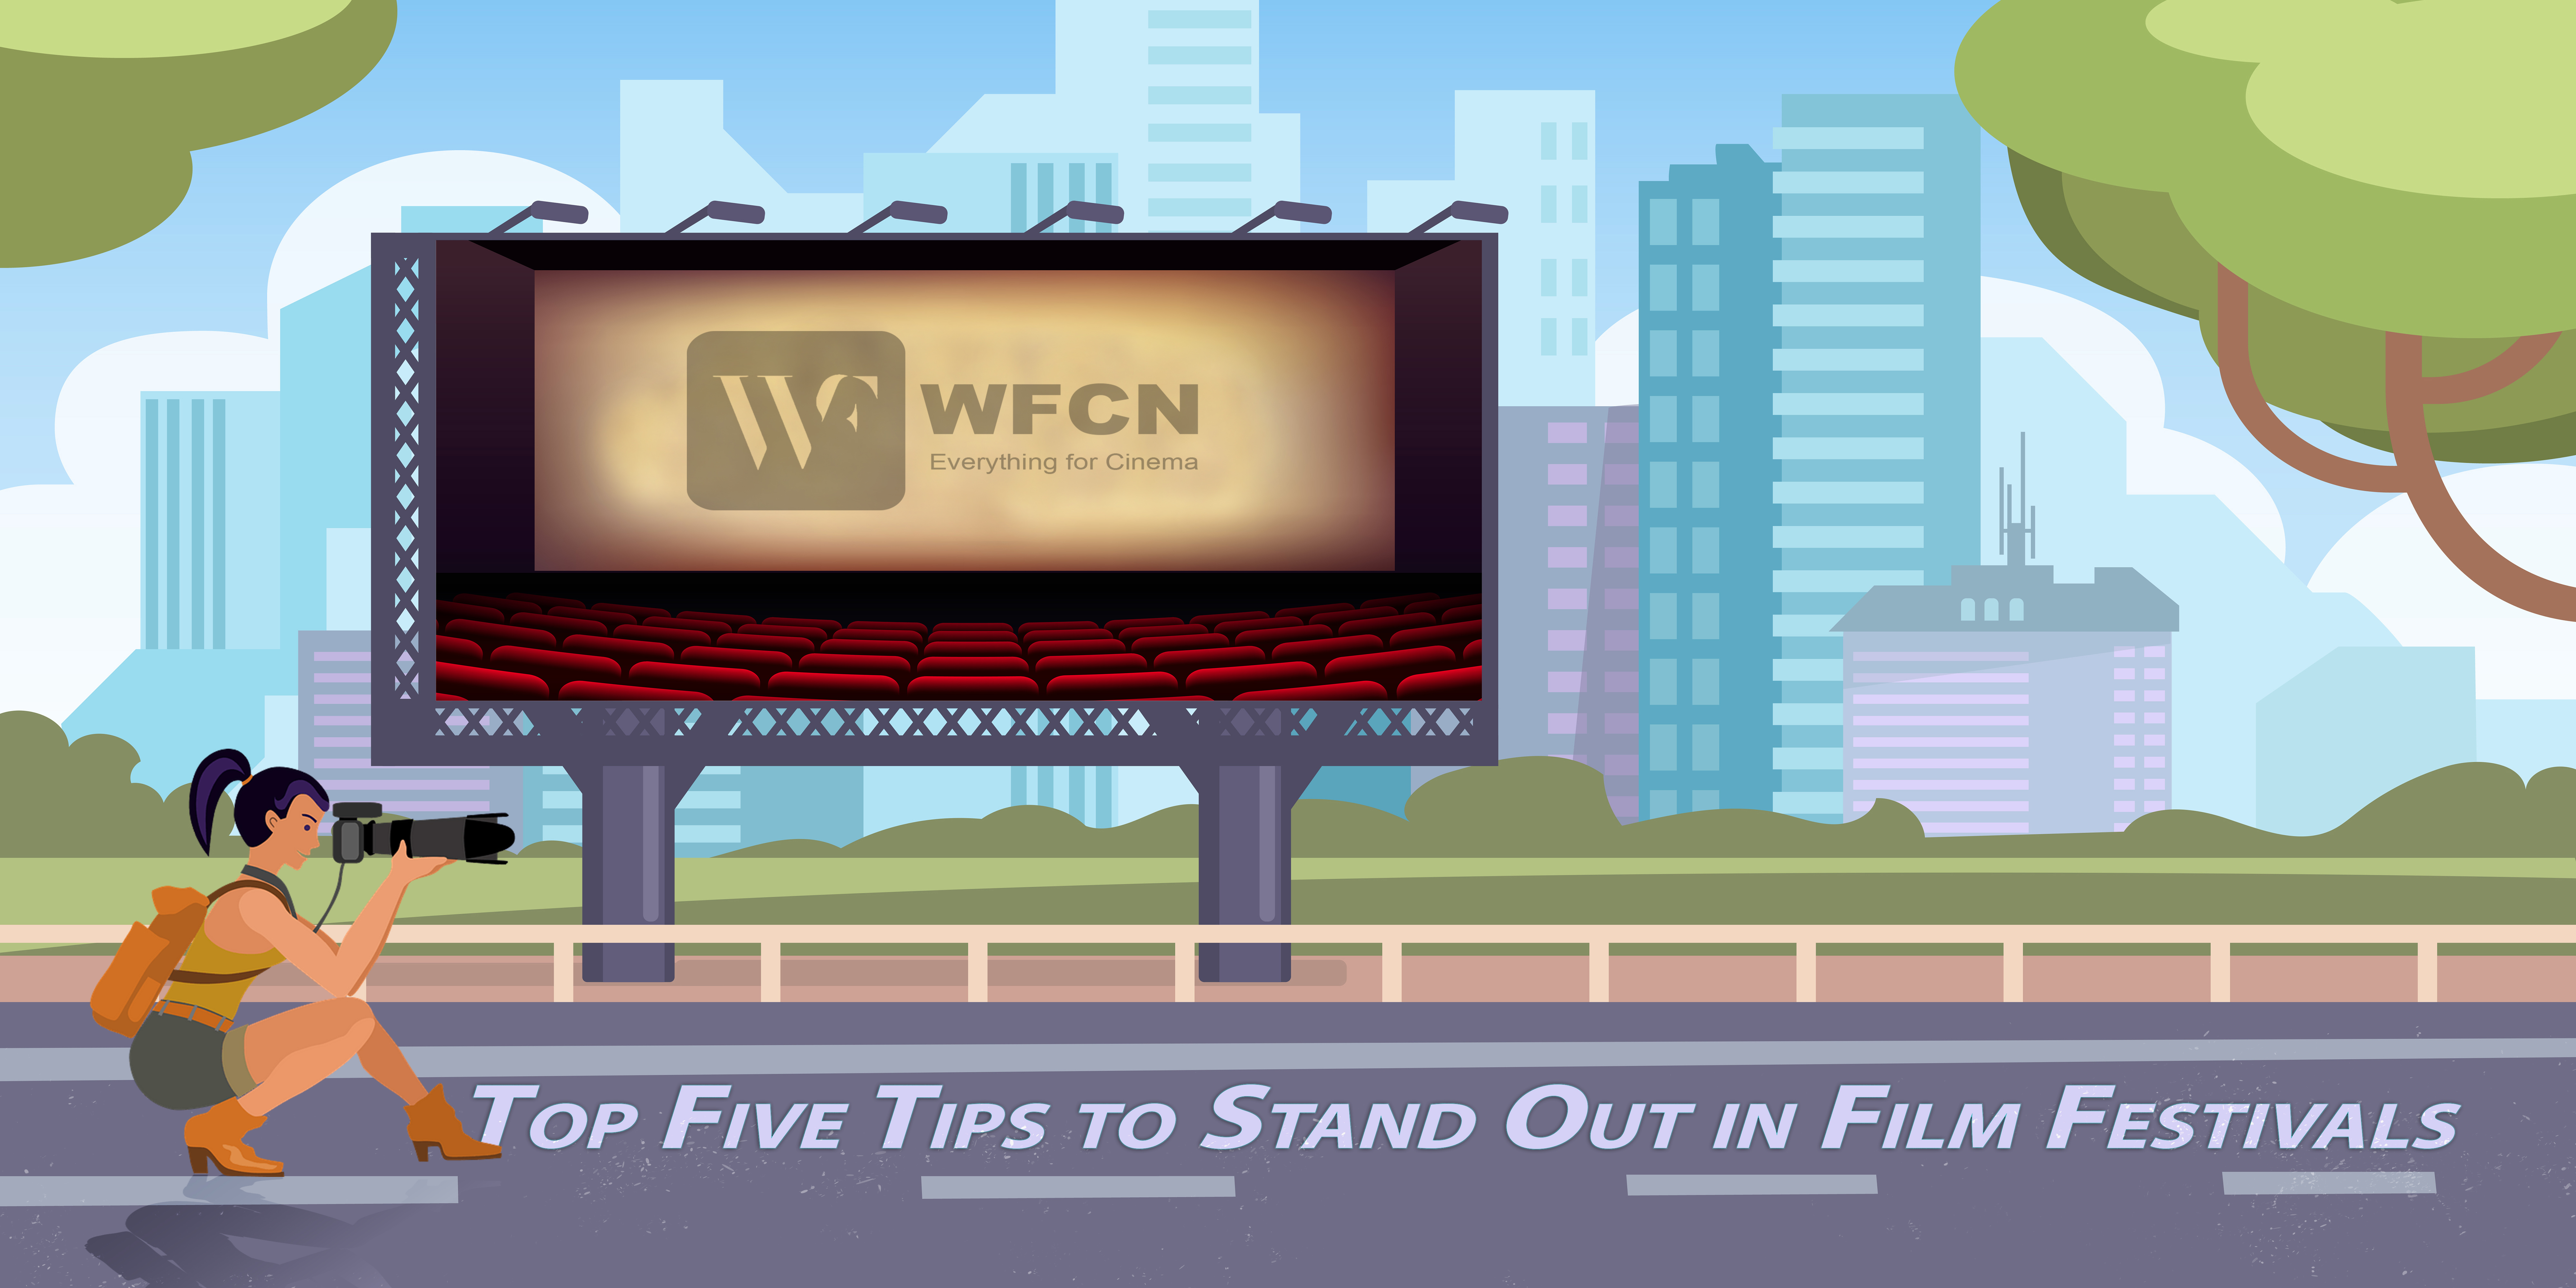 Top Five Tips to Stand Out in Film Festivals